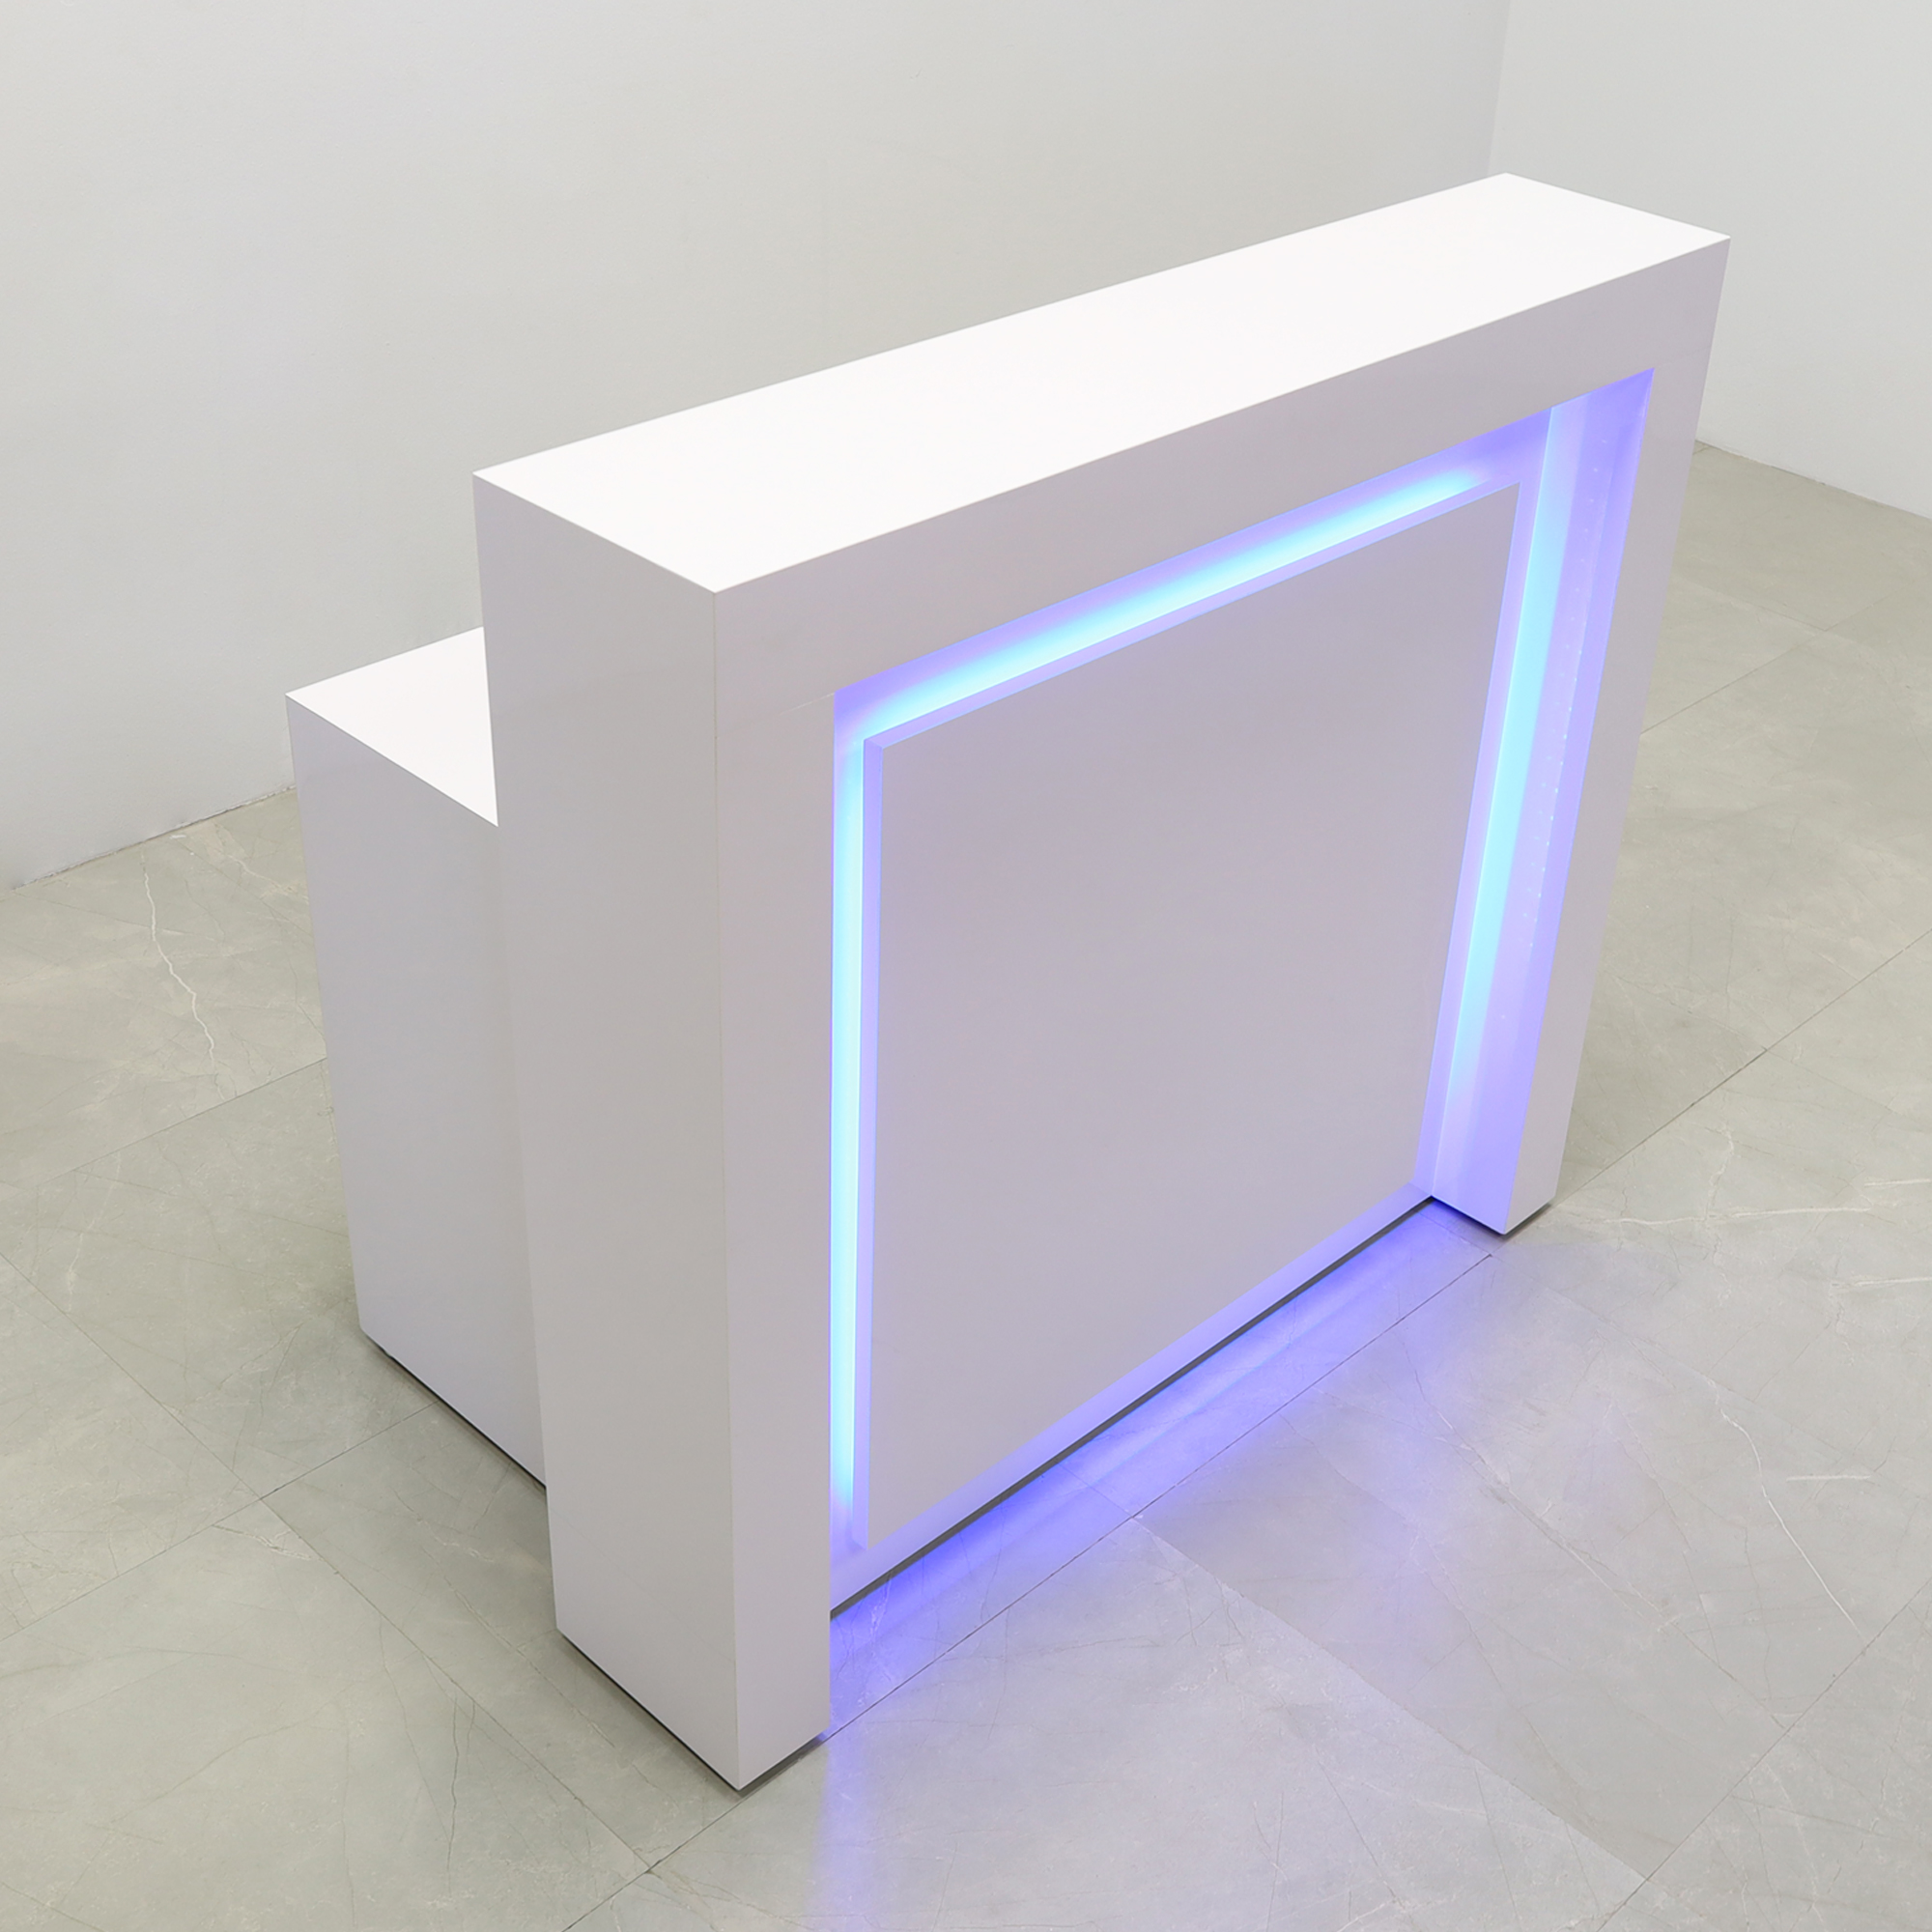 48-inch New York Straight Reception Desk in white gloss laminate finish, with multi-colored LED, shown here.